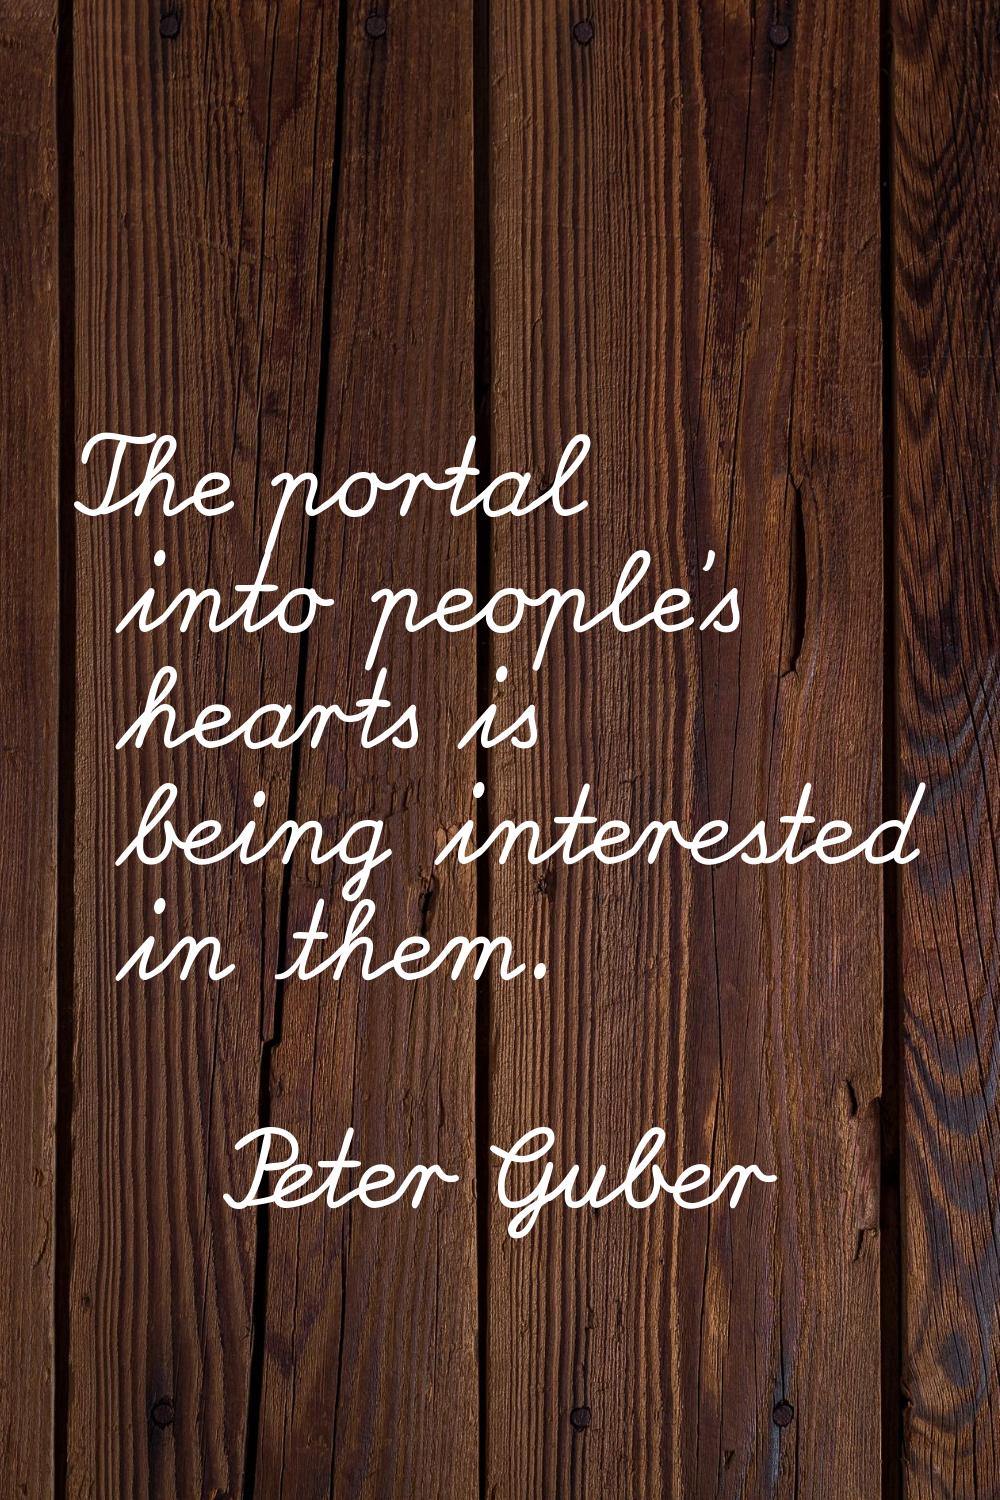 The portal into people's hearts is being interested in them.